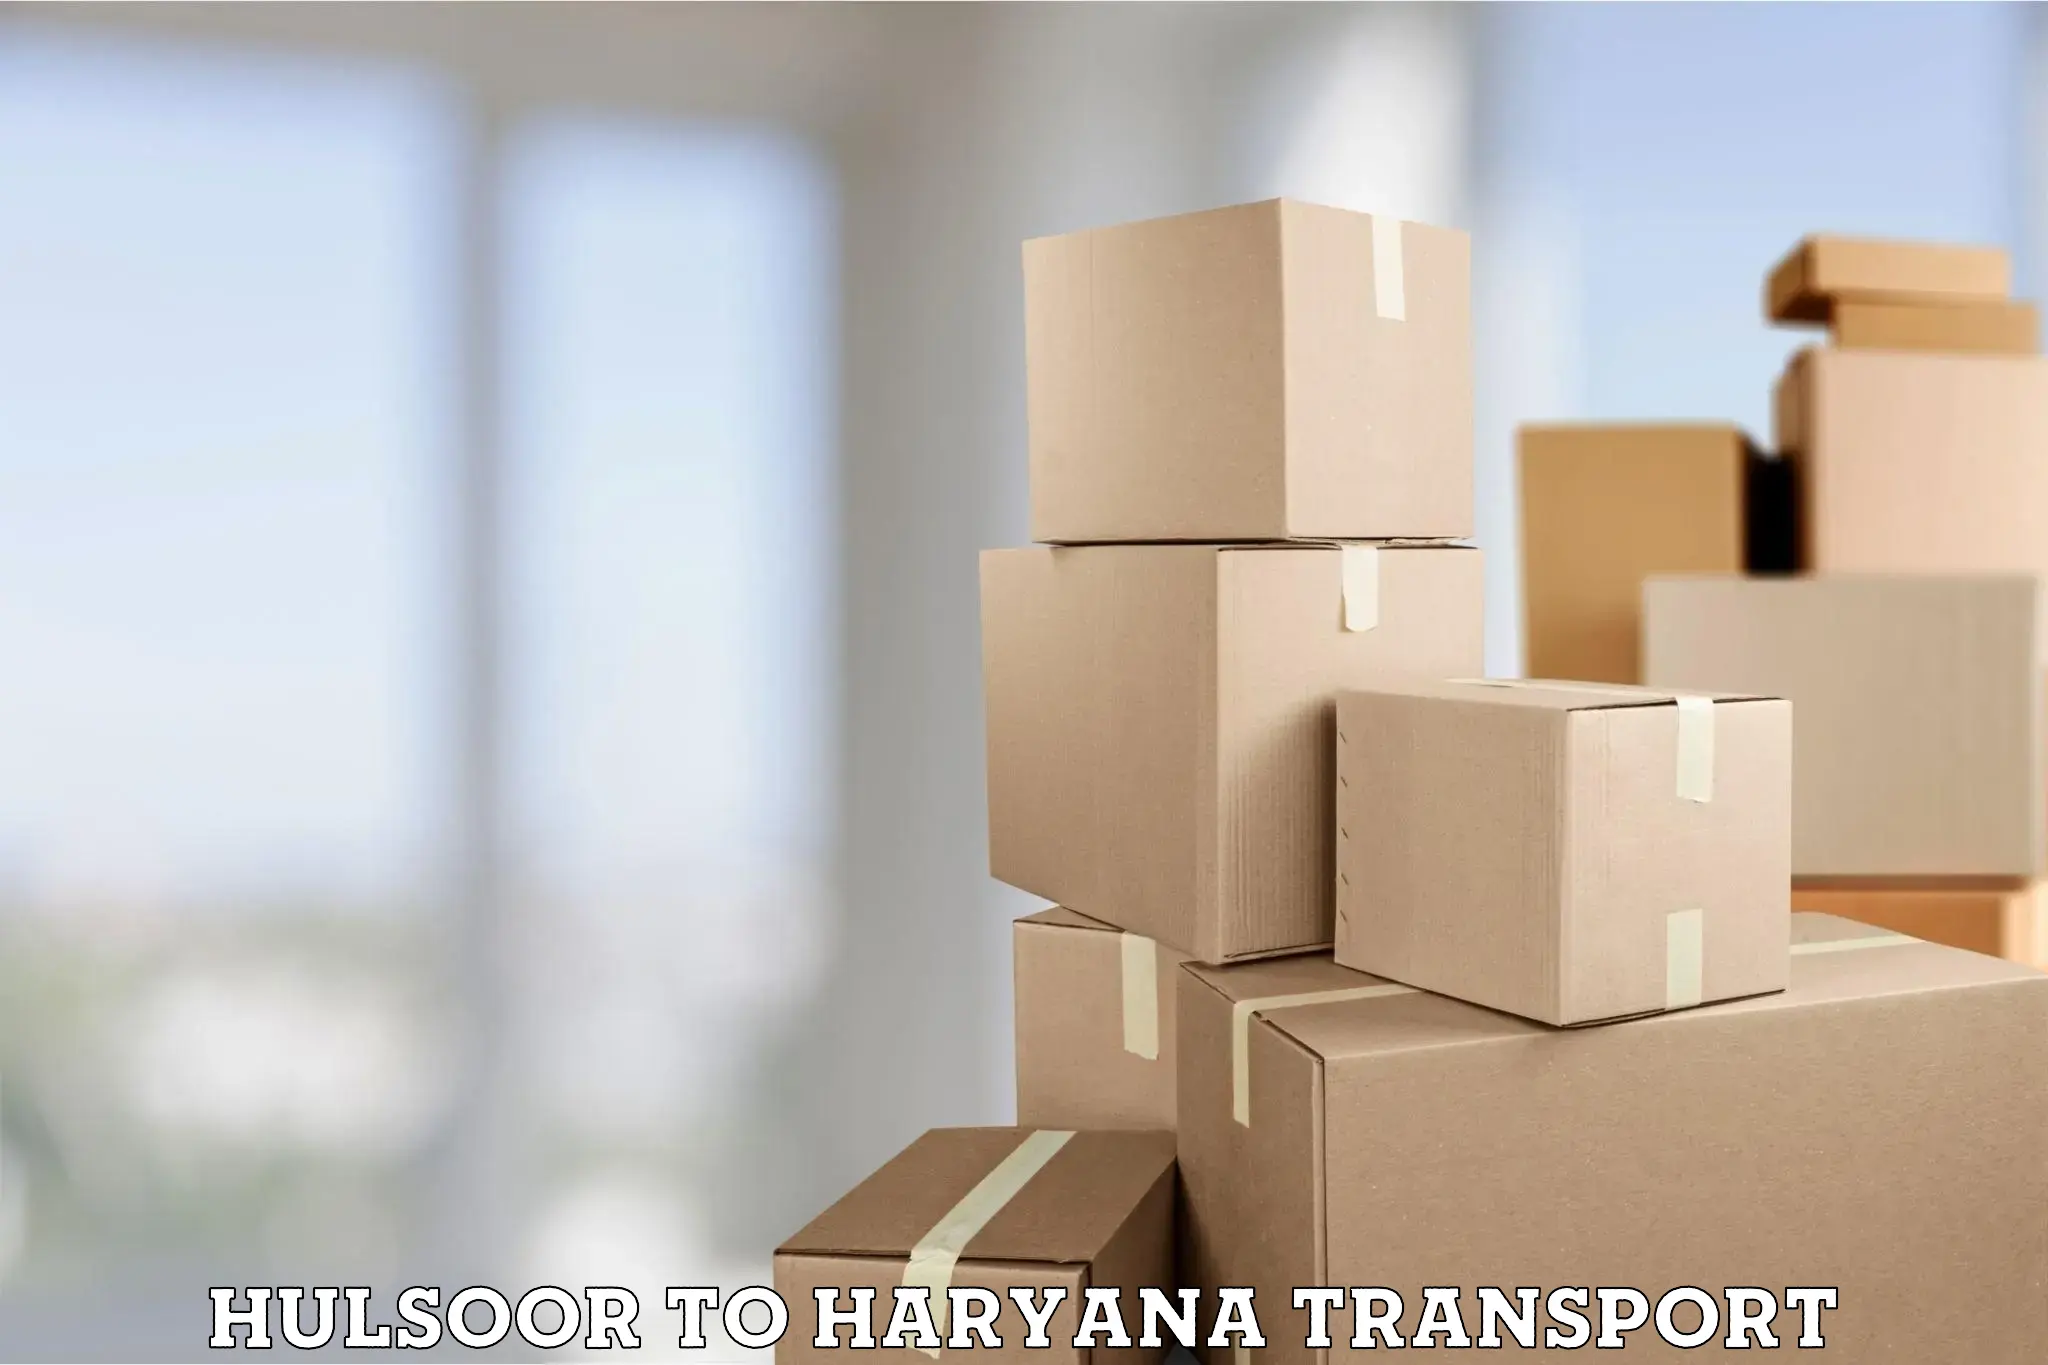 Interstate transport services in Hulsoor to Ambala